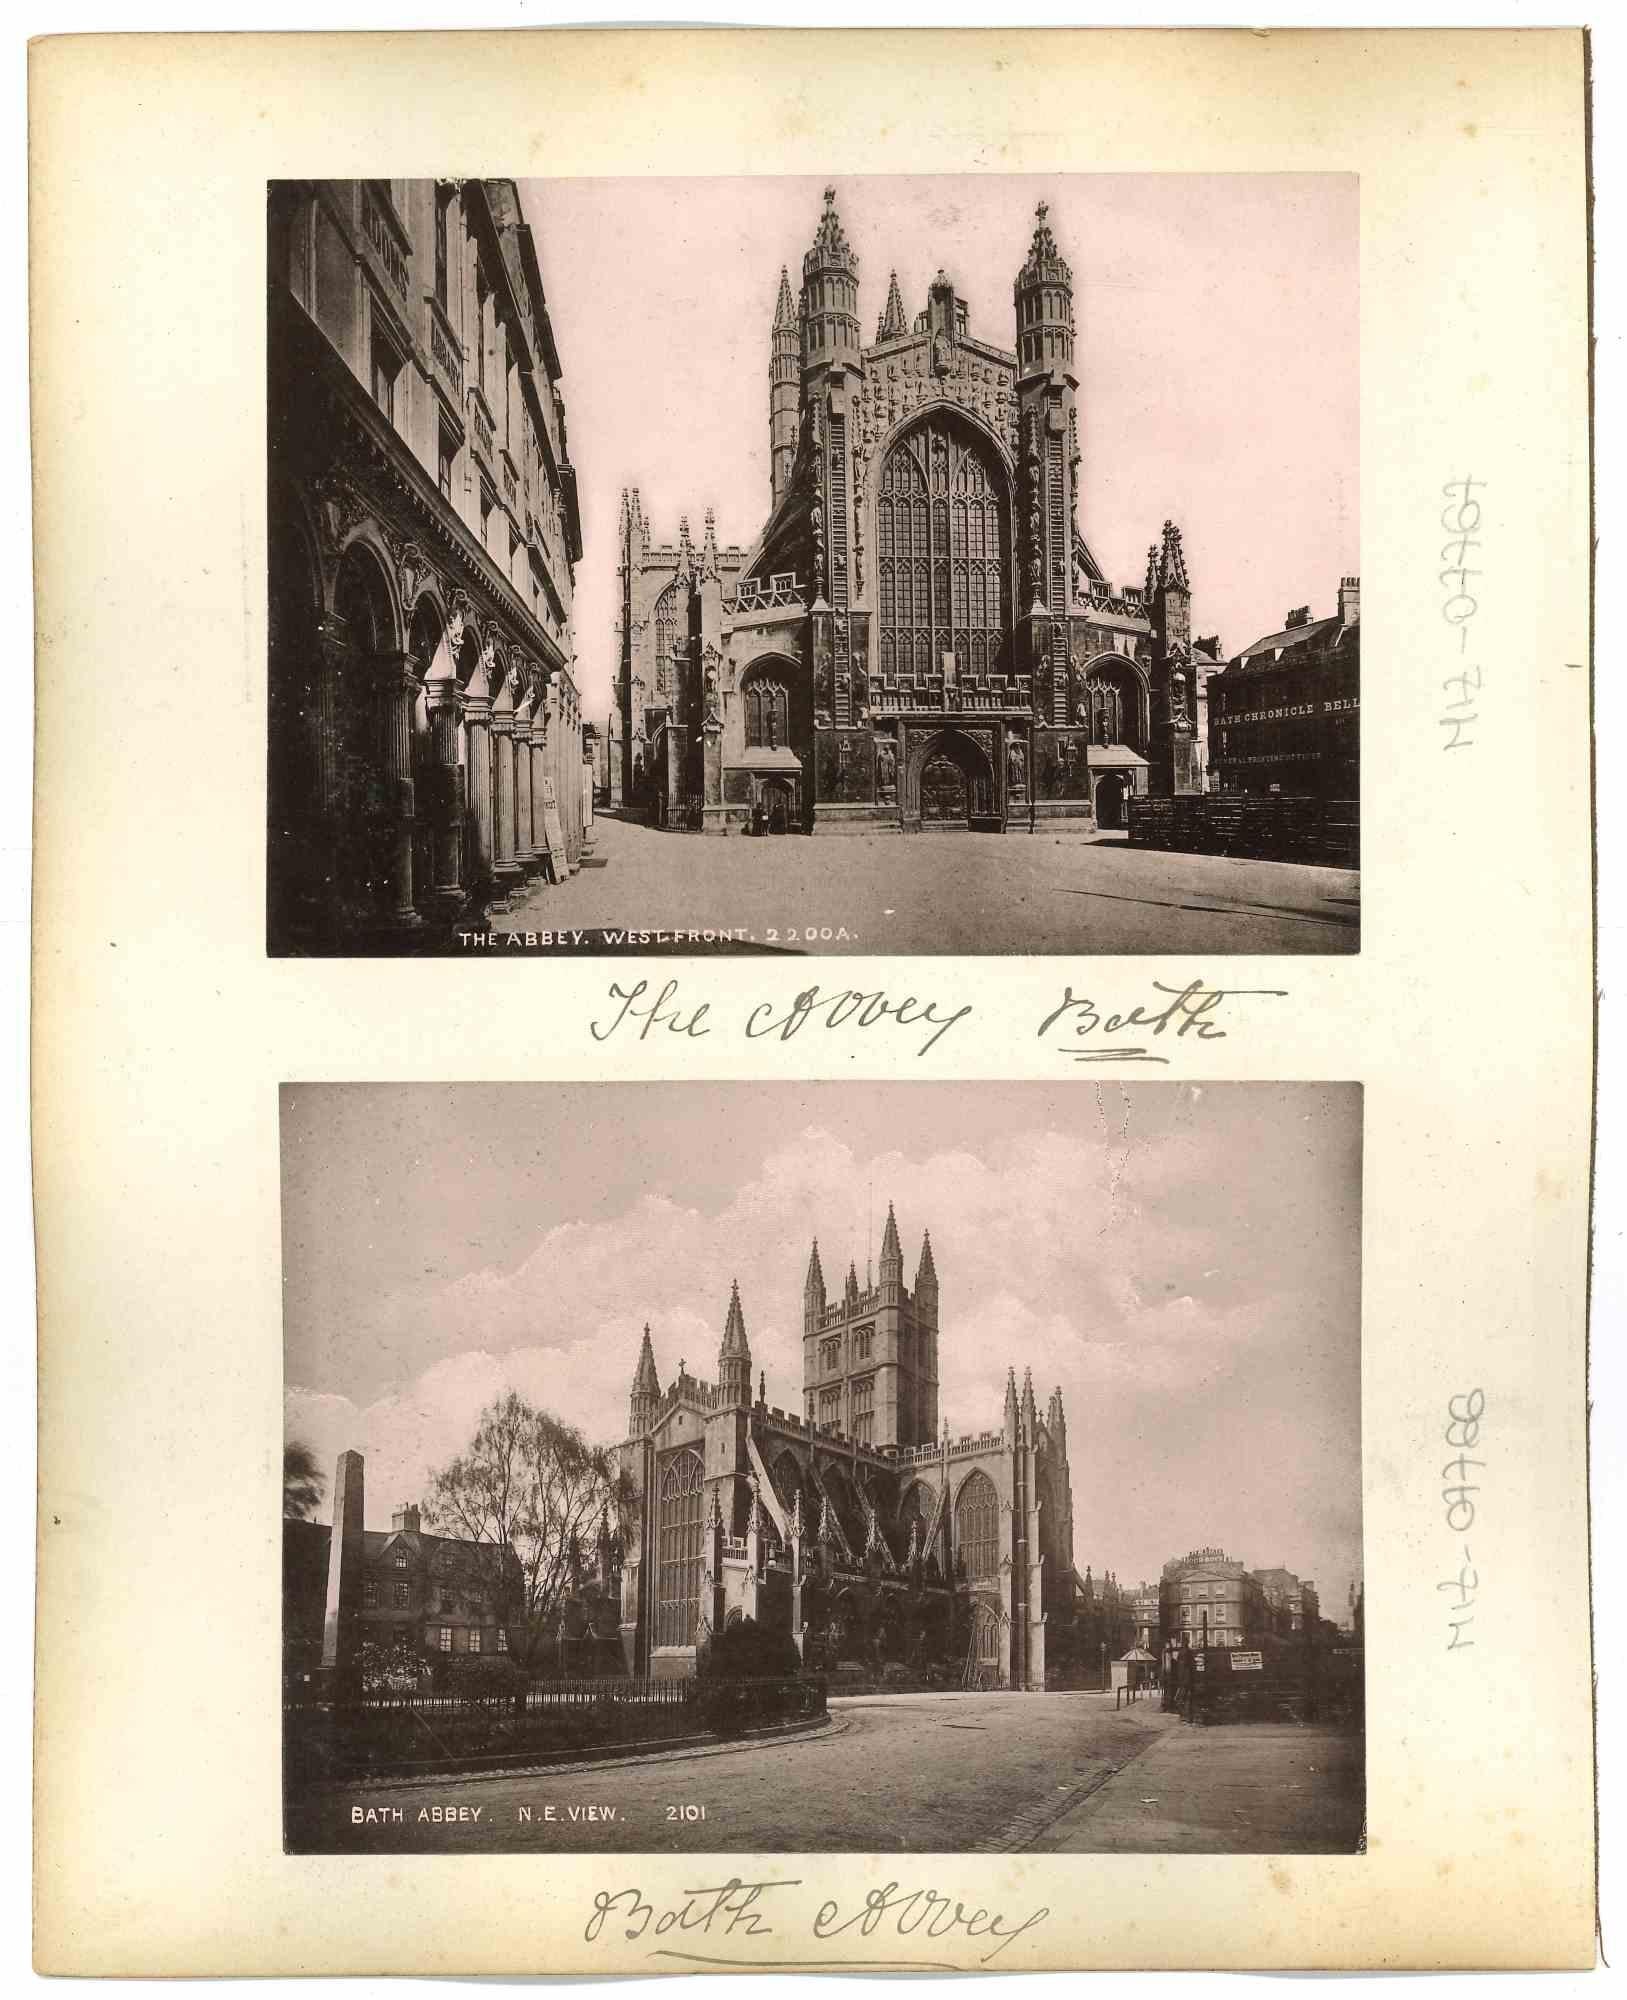 Unknown Landscape Photograph - Historical Places Photo - Bath Abbey - Early 20th Century